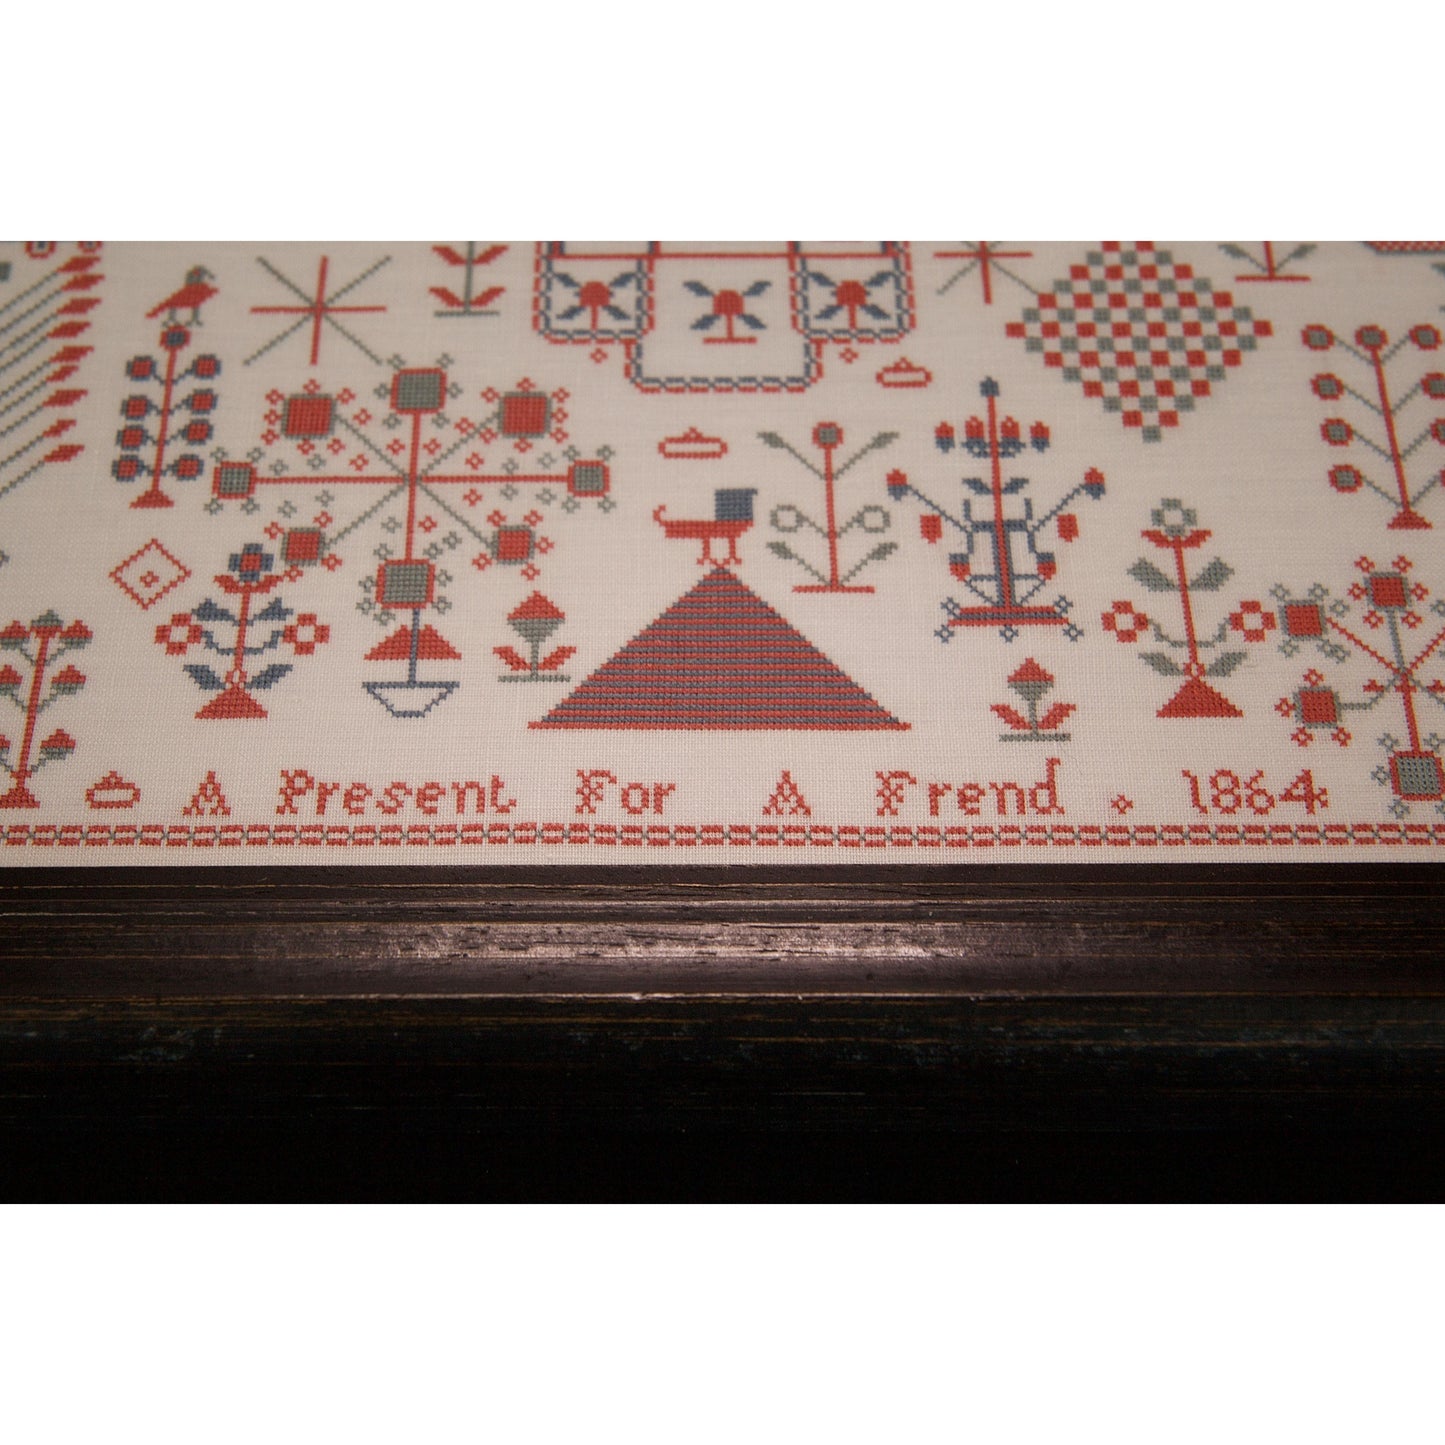 A Present For A Frend 1864 Limited Edition Sampler